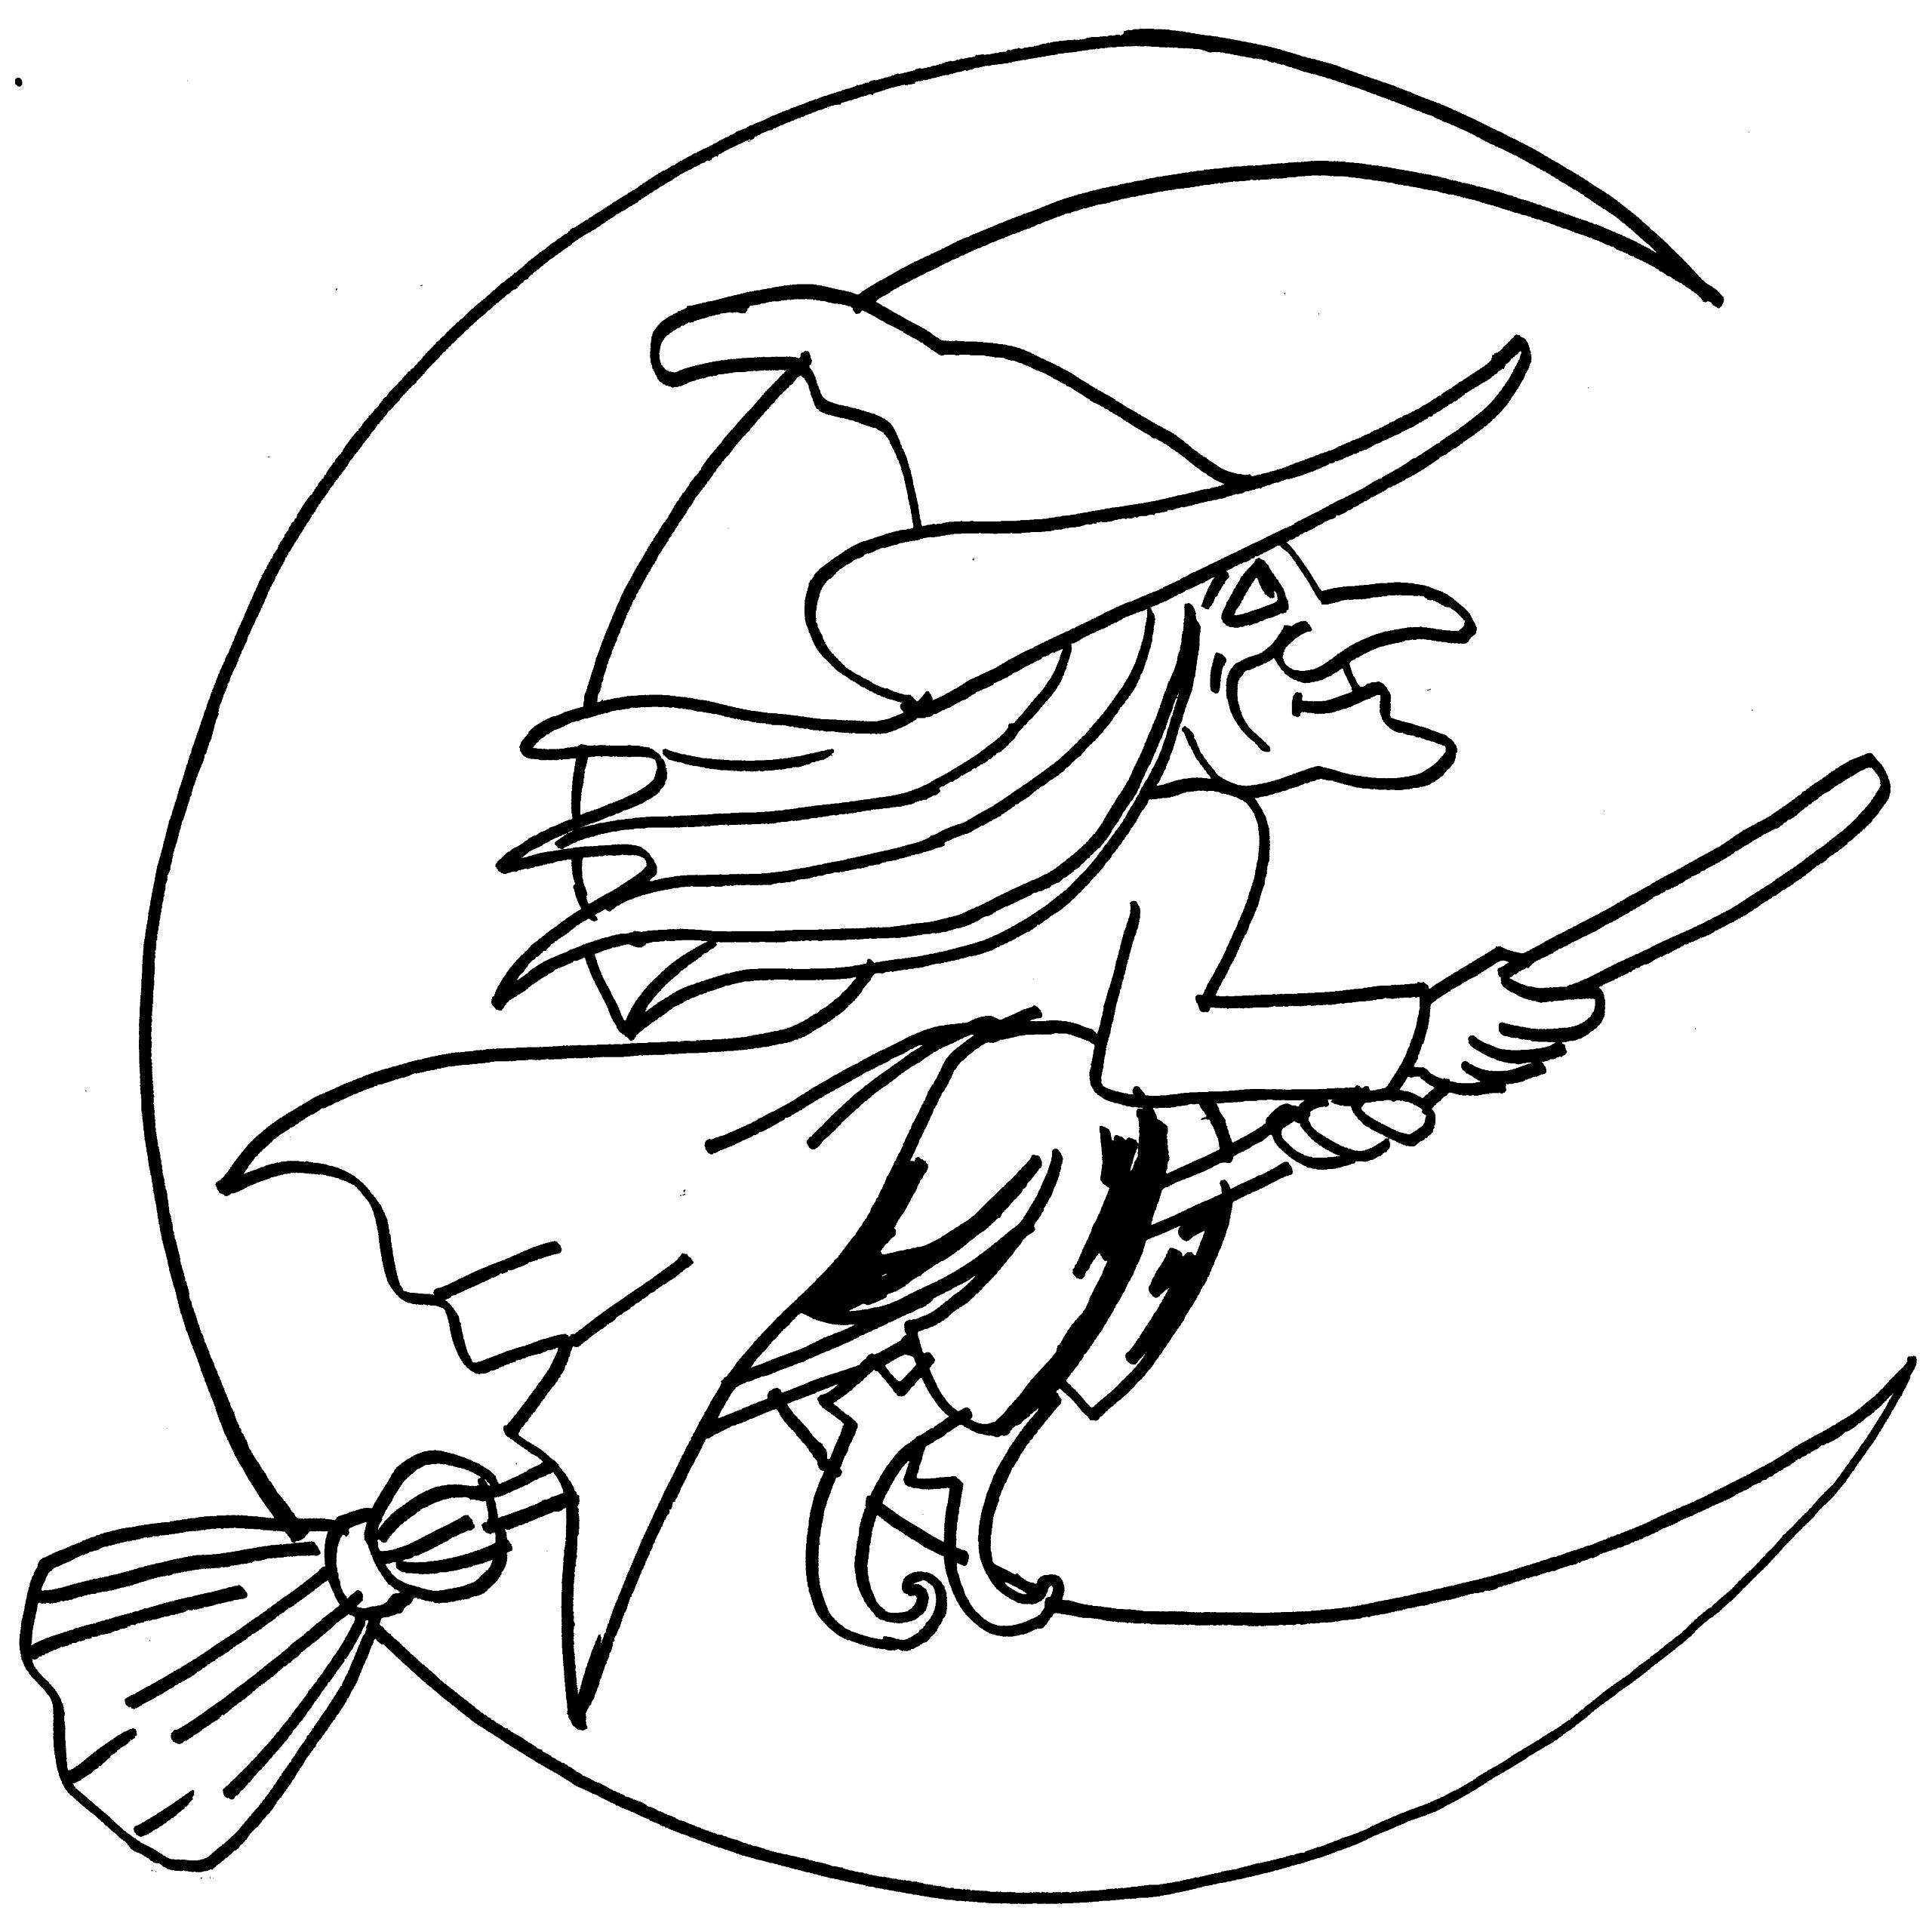 Full Moon Coloring Pages at GetDrawings | Free download